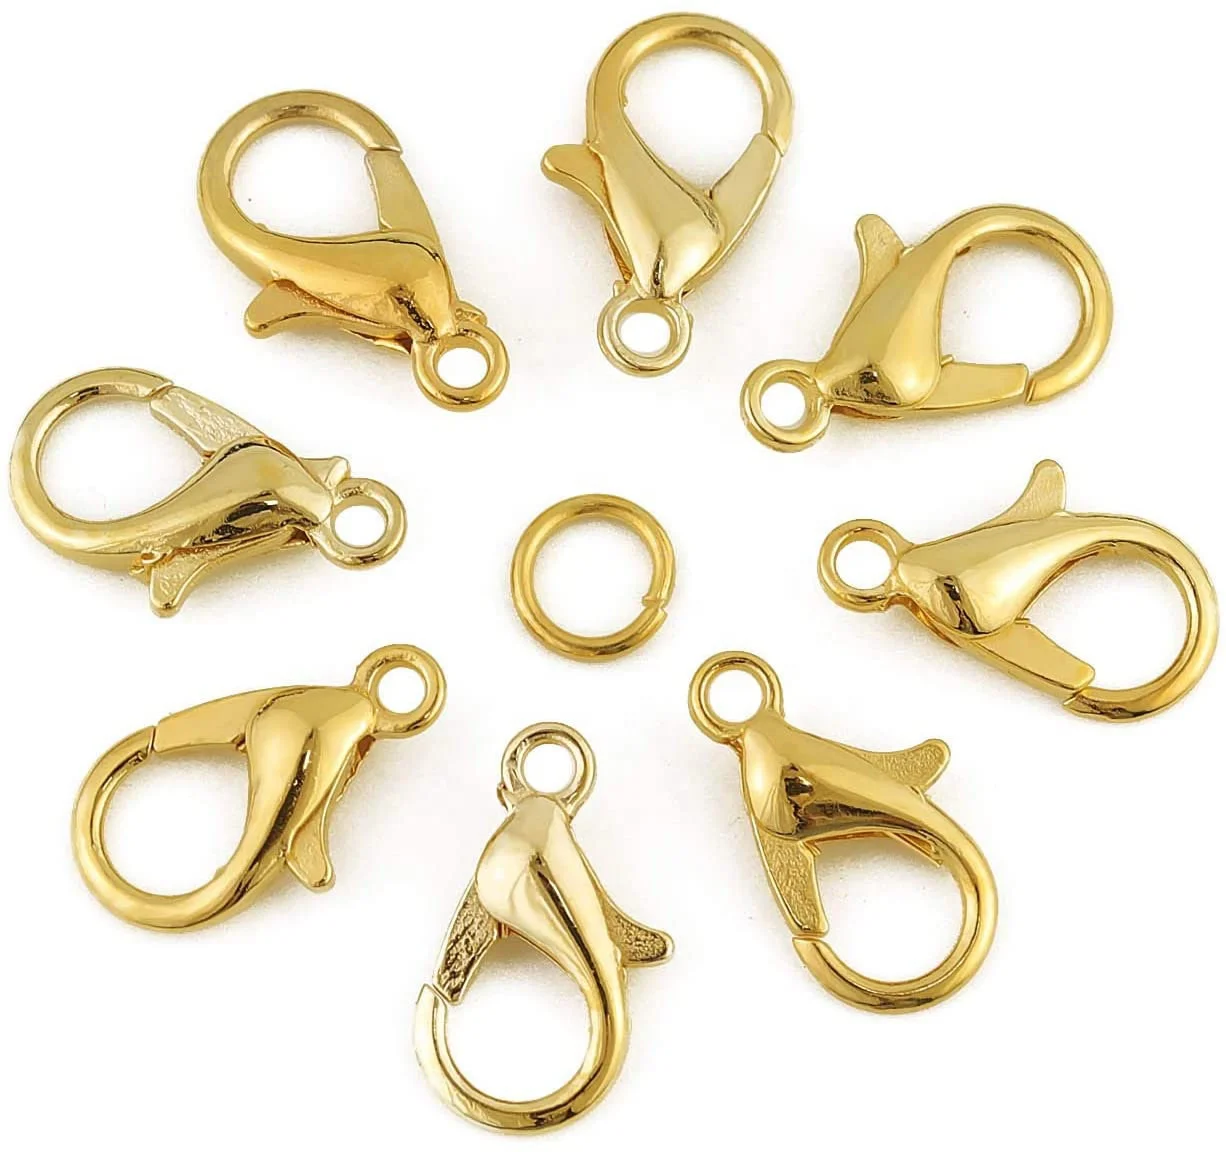 

Wholesale accessory lobster clasp stainless steel snap jewelry for bracelet and necklace making with closed ring, Gold,silver